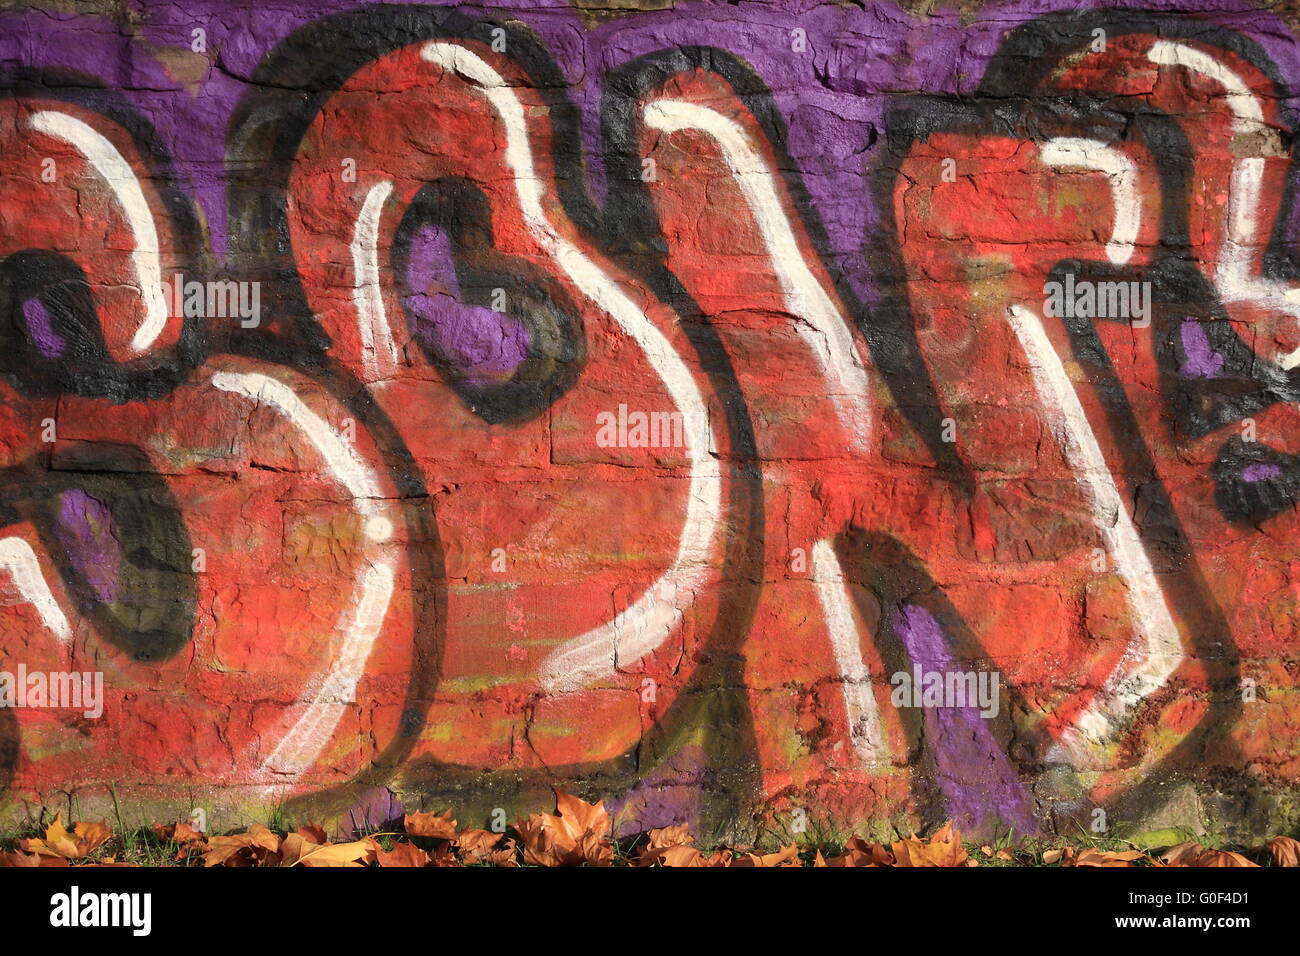 Graffiti in front of autumn leaves Stock Photo